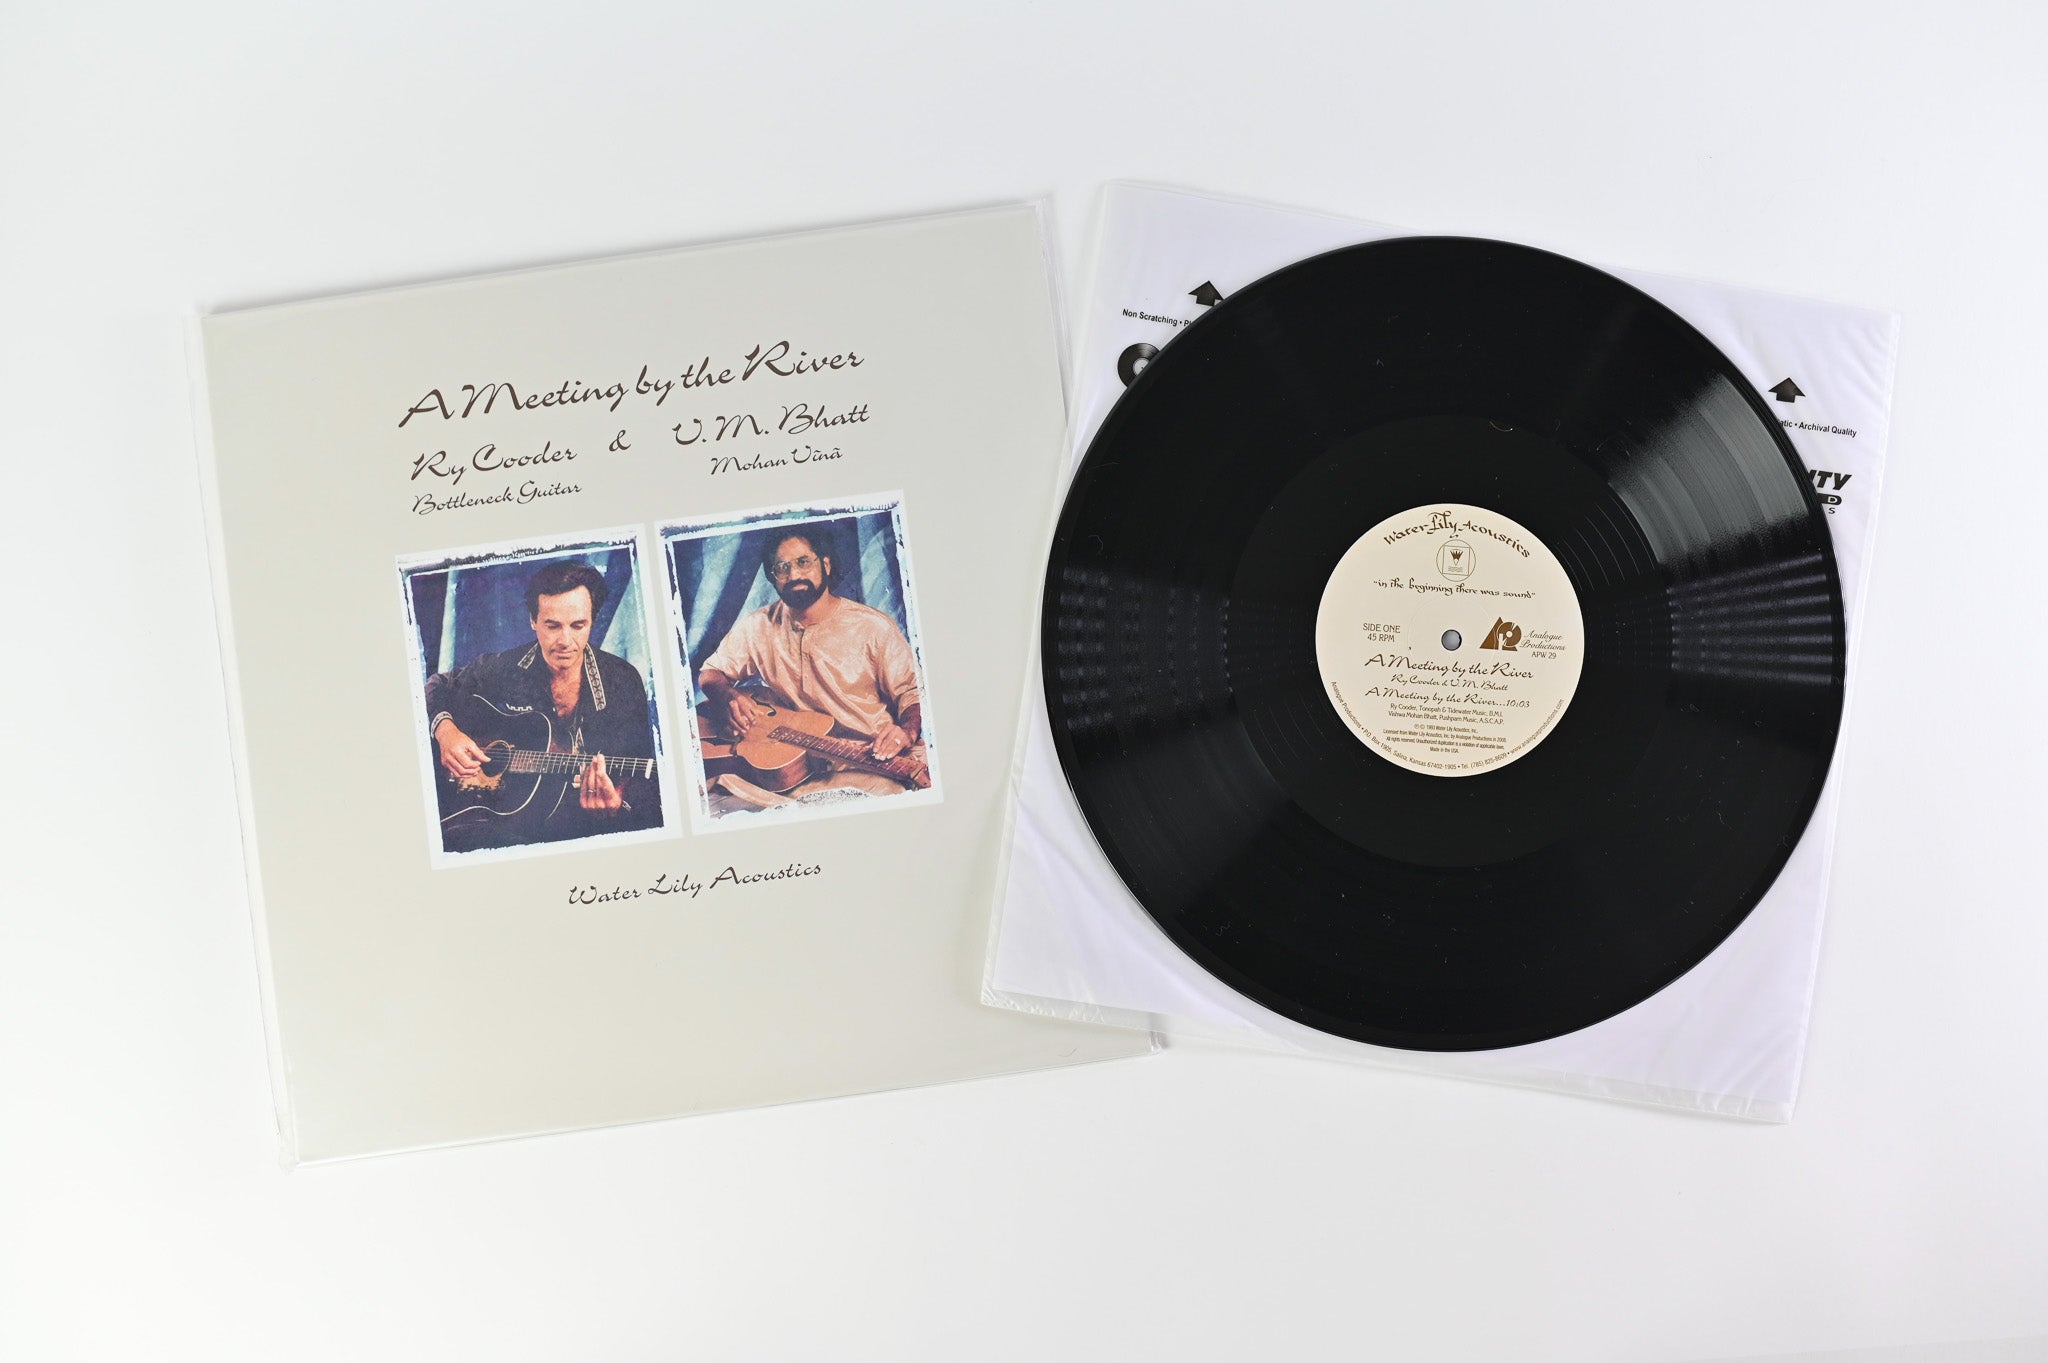 Ry Cooder - A Meeting By The River Reissue on Analogue Productions 45 RPM